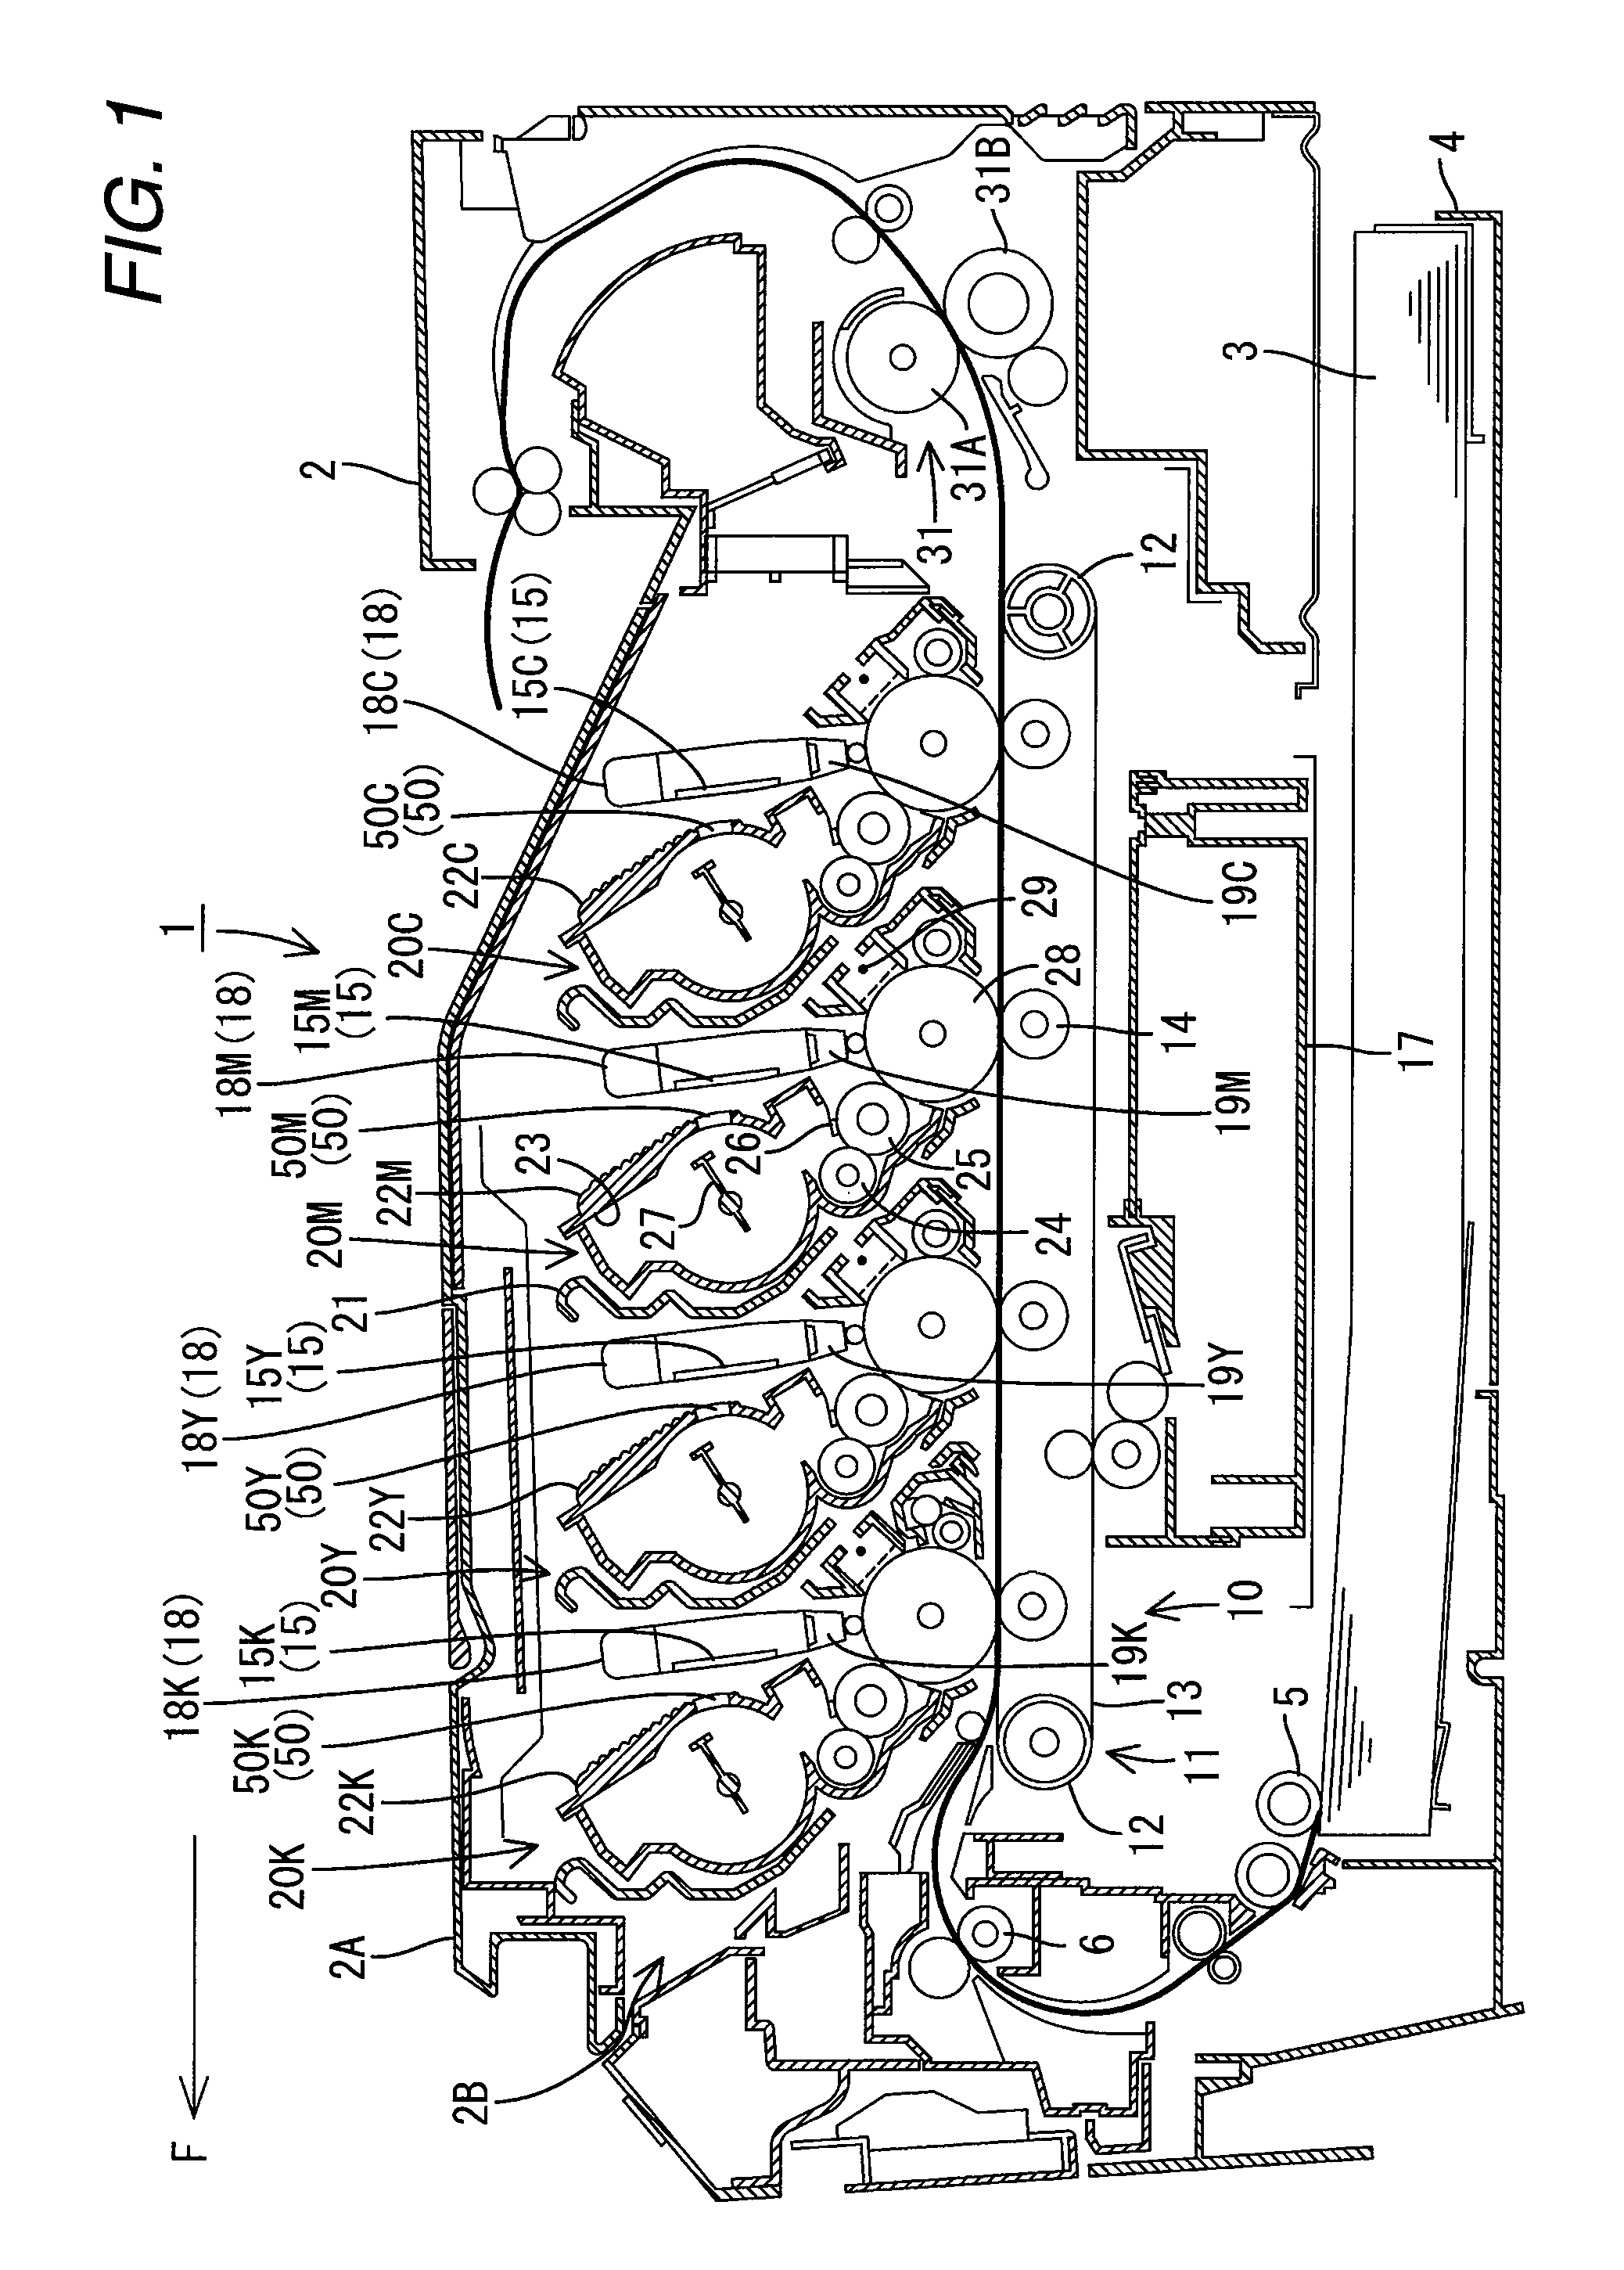 Image forming apparatus and development cartridge in which information stored on the development cartridge can be read by the image forming apparatus